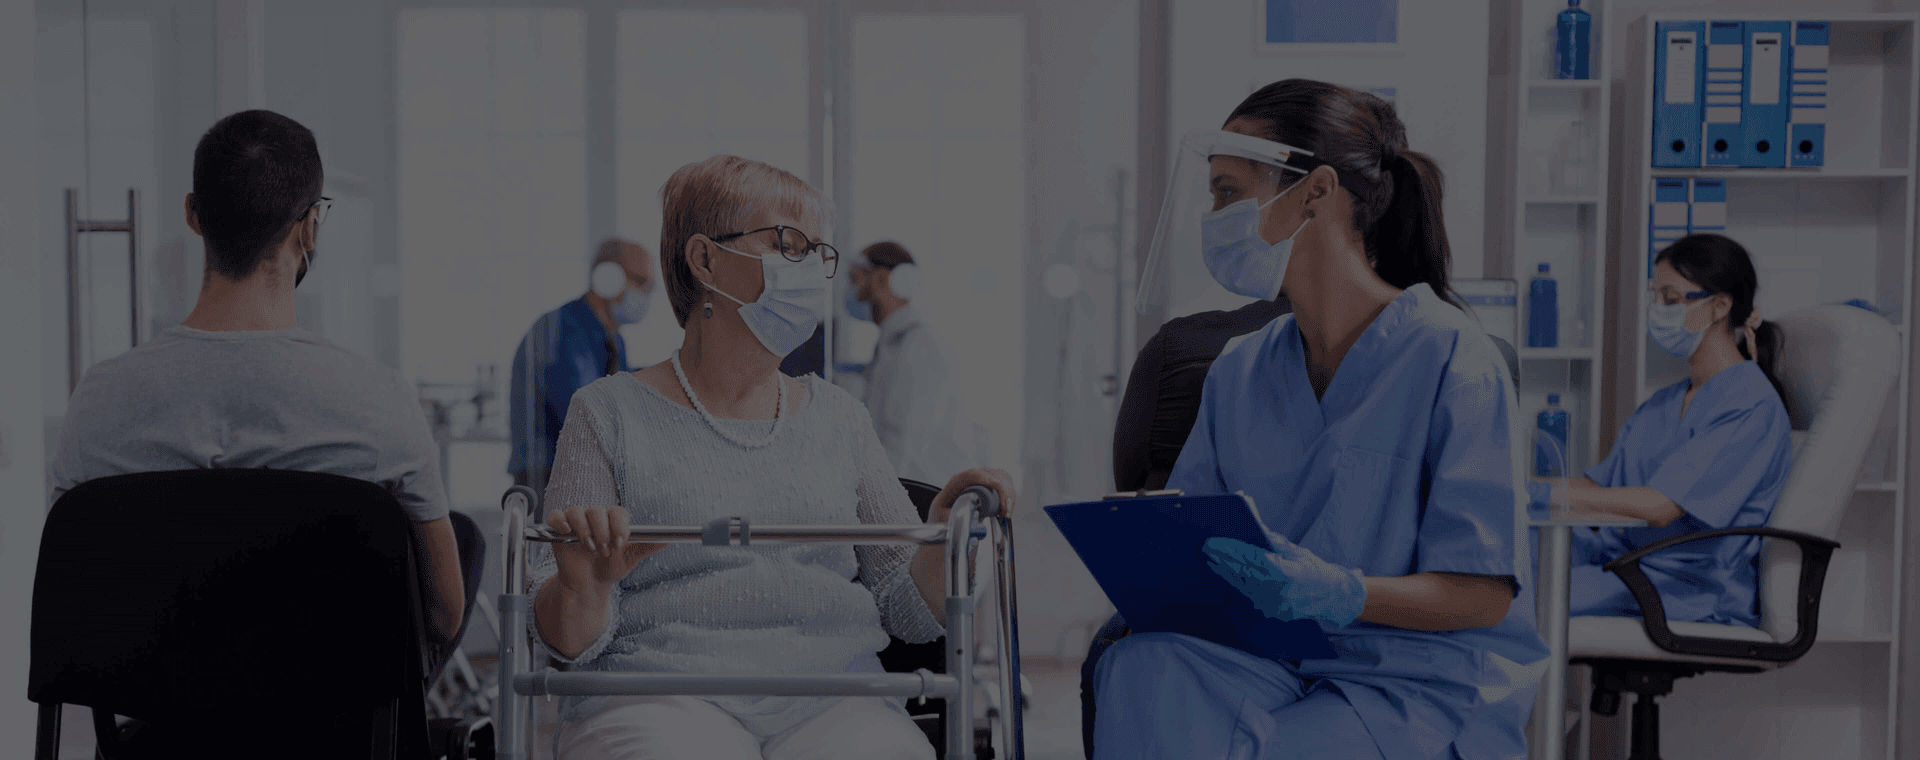 Leveraging AI Video Analytics for
Healthcare Security